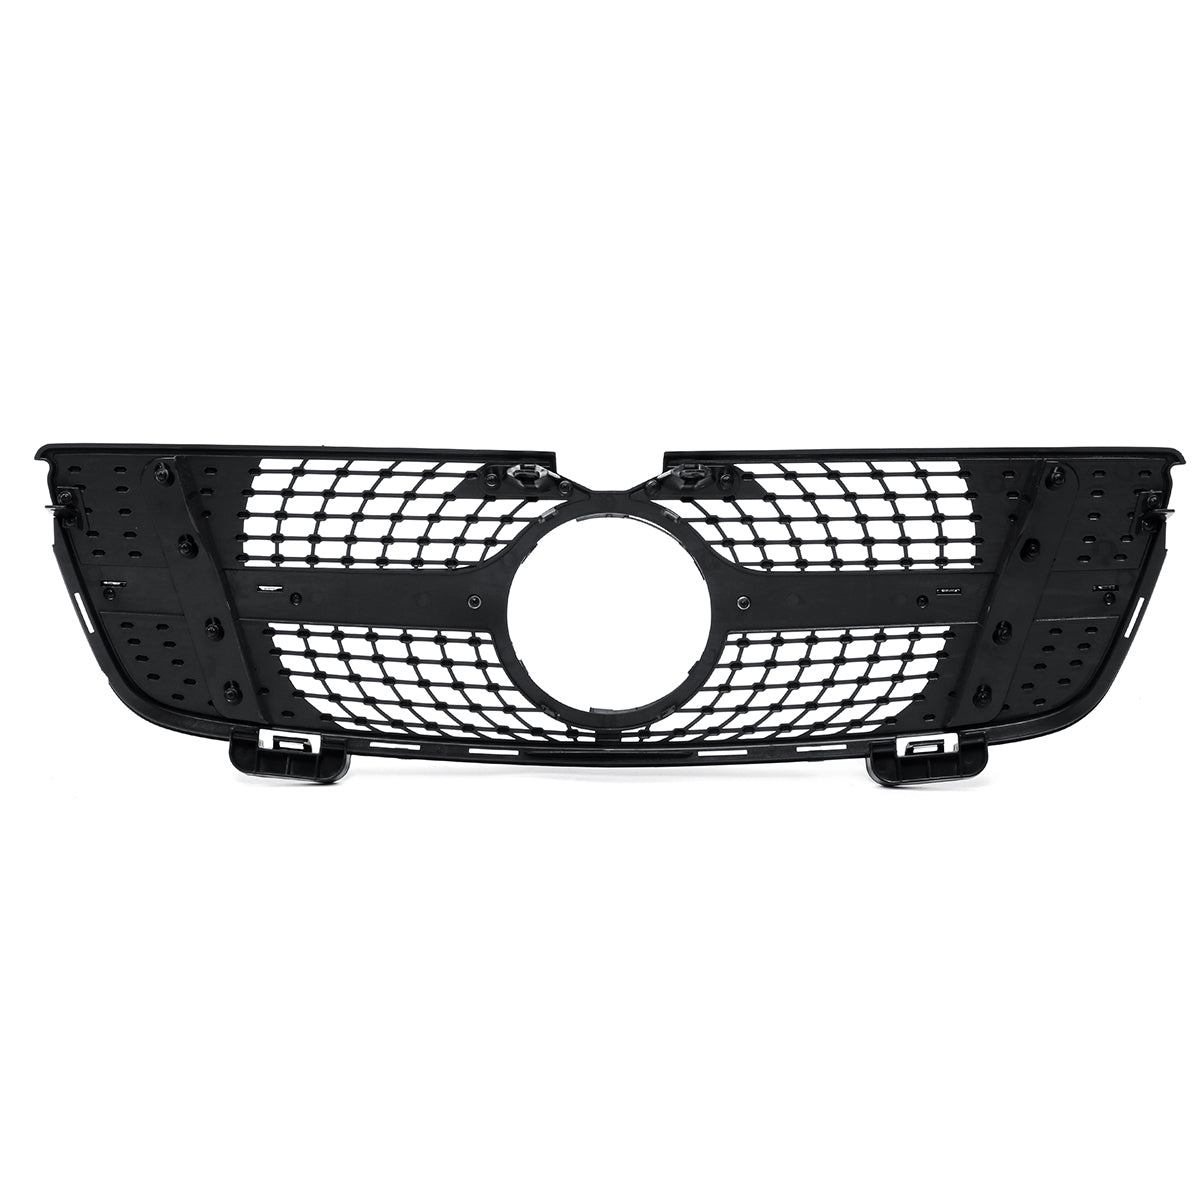 White Smoke Black Diamond Style Front Grille Grill For Mercedes-Benz GL-Class X164 GL320/350/450